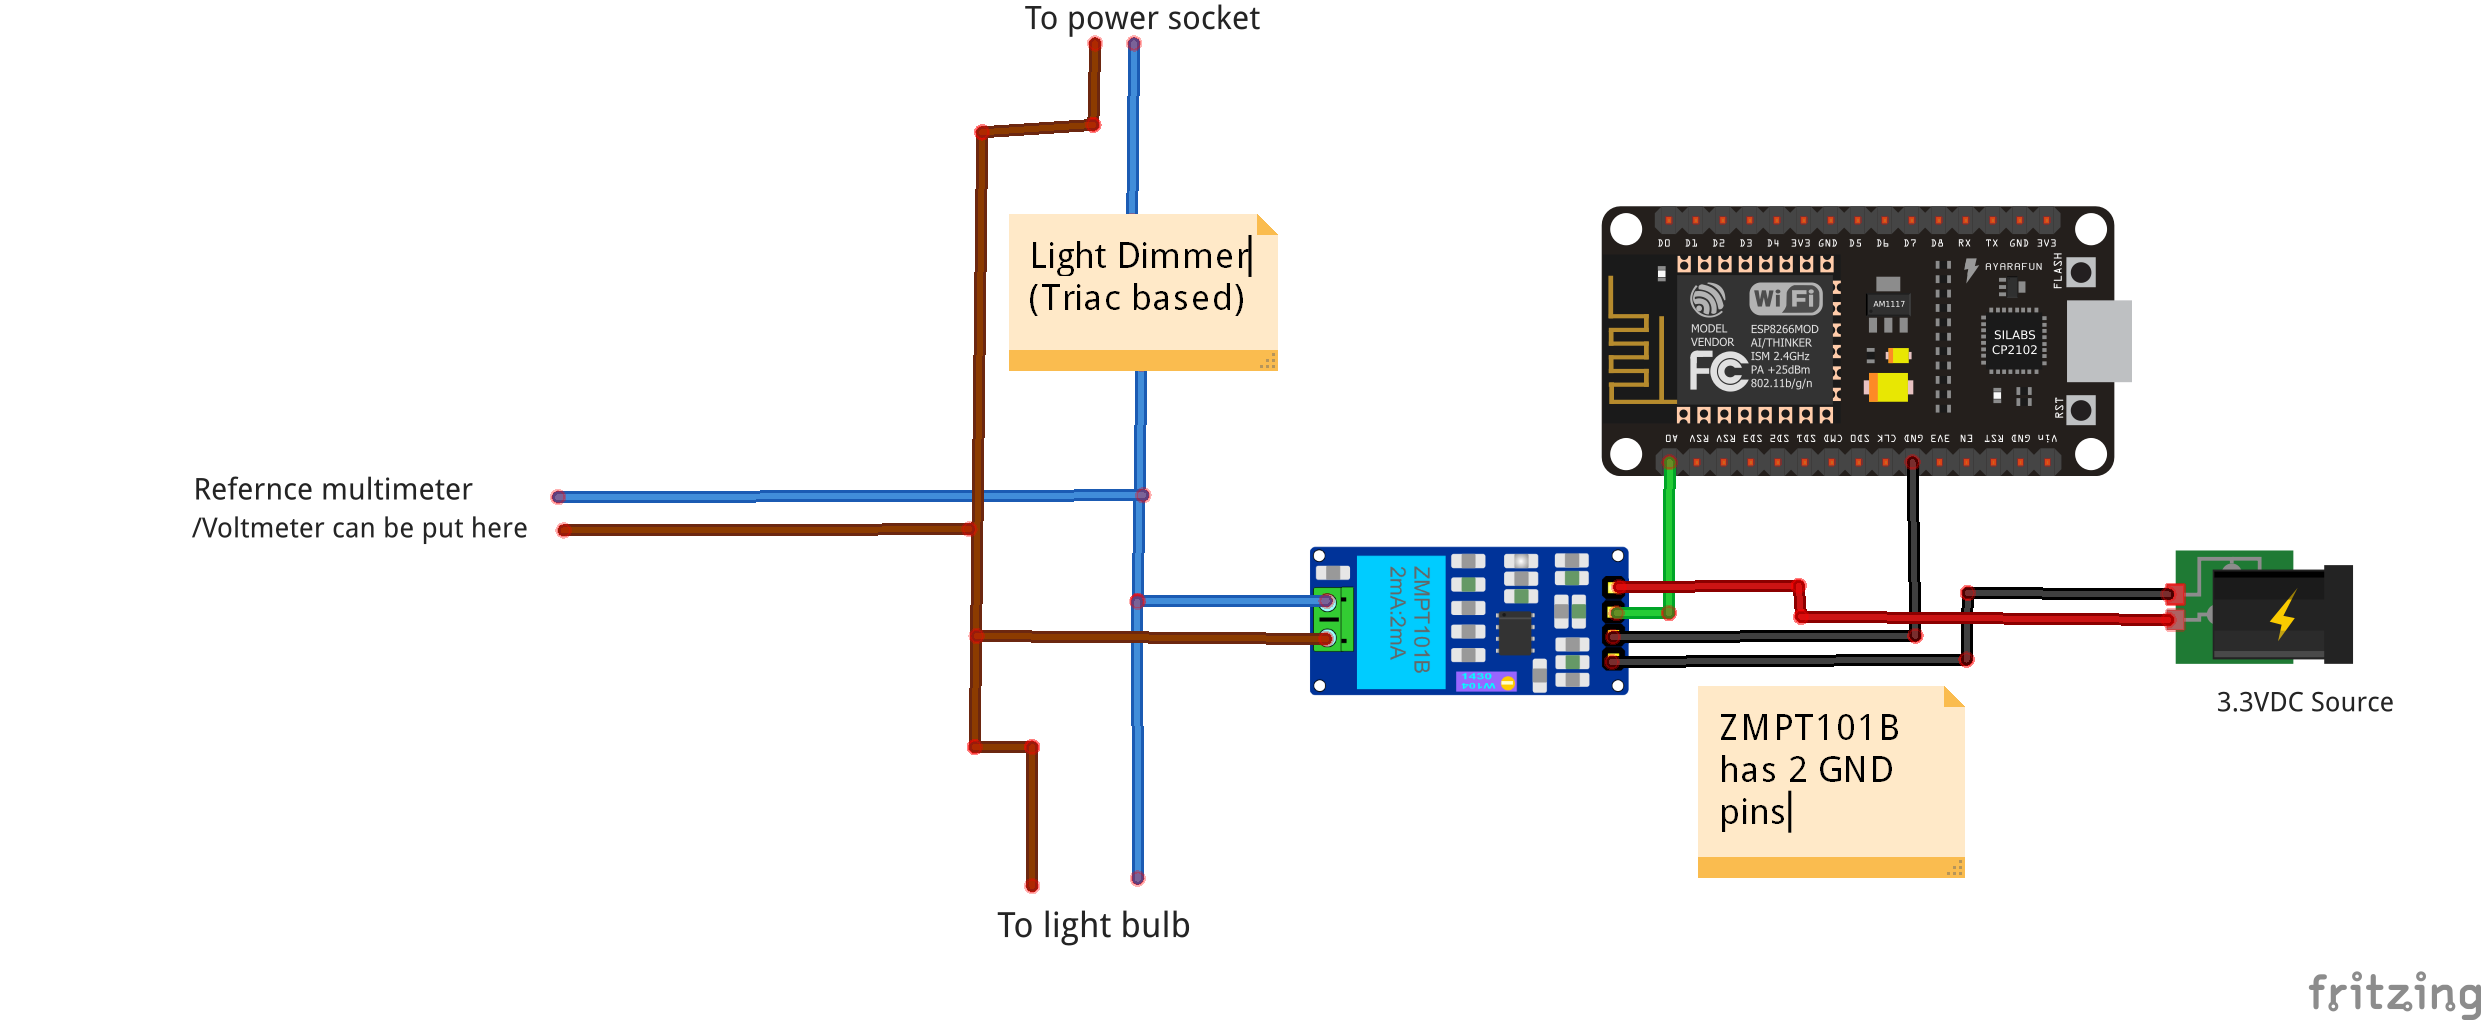 Measure AC voltage with ZMPT101B and ESP8266 12E Hackster.io